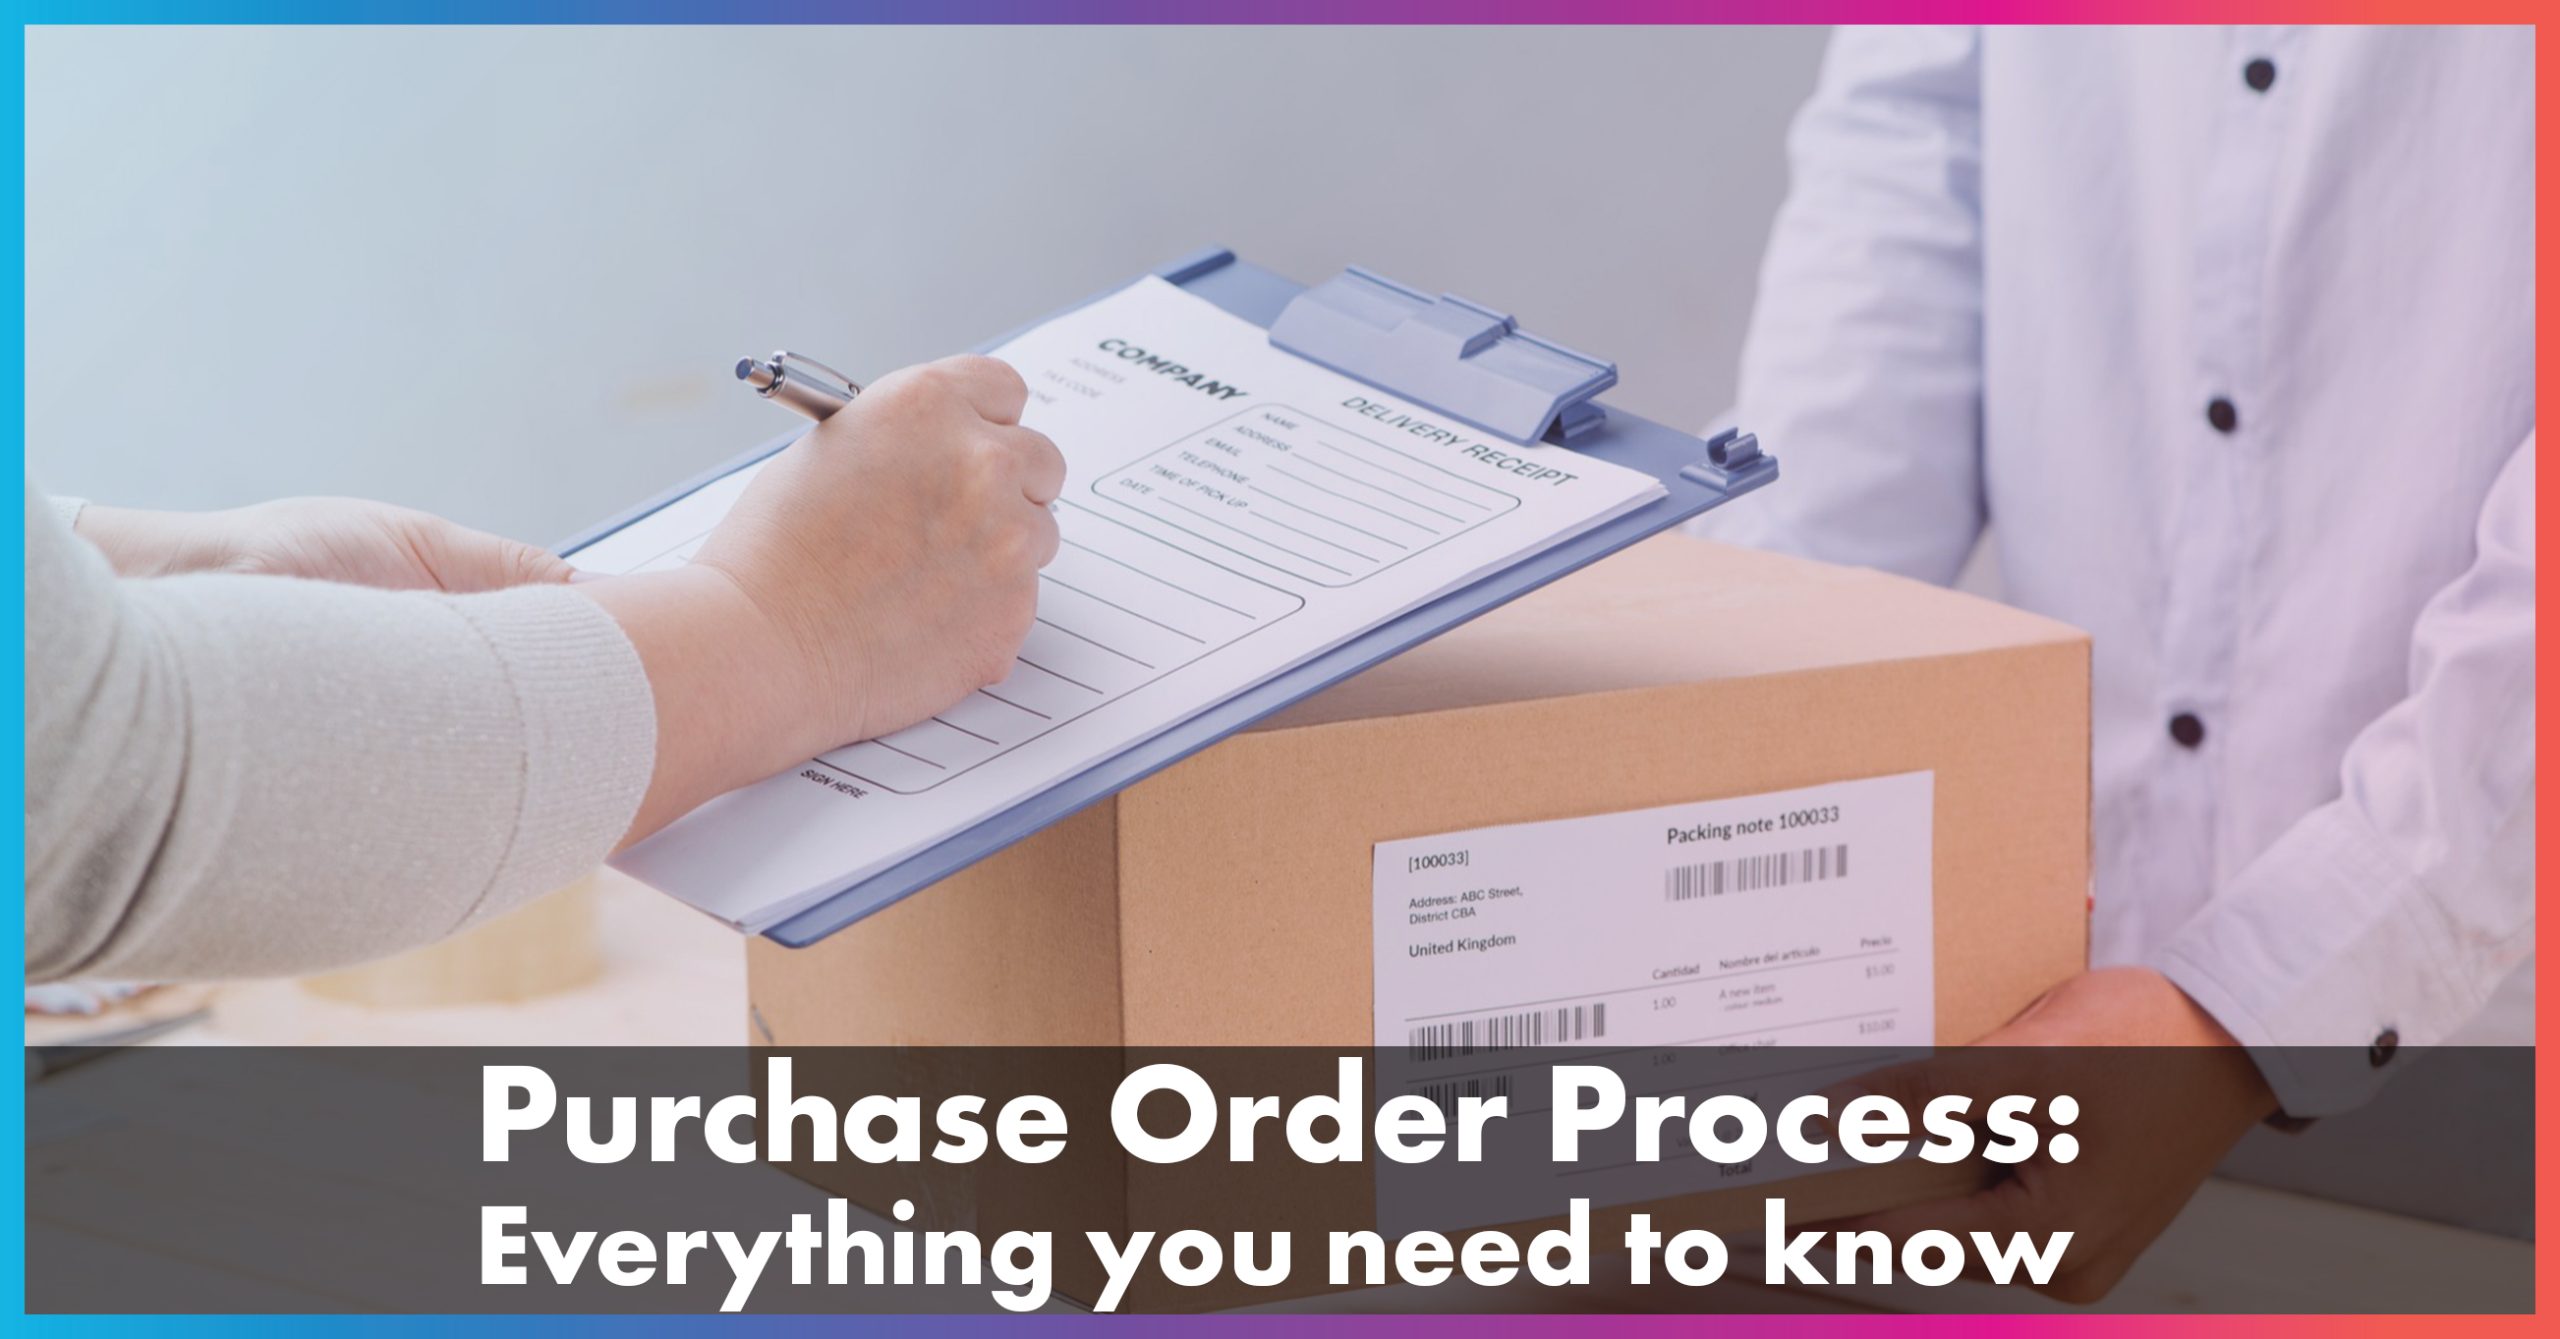 Purchase Order Process: Everything you need to know